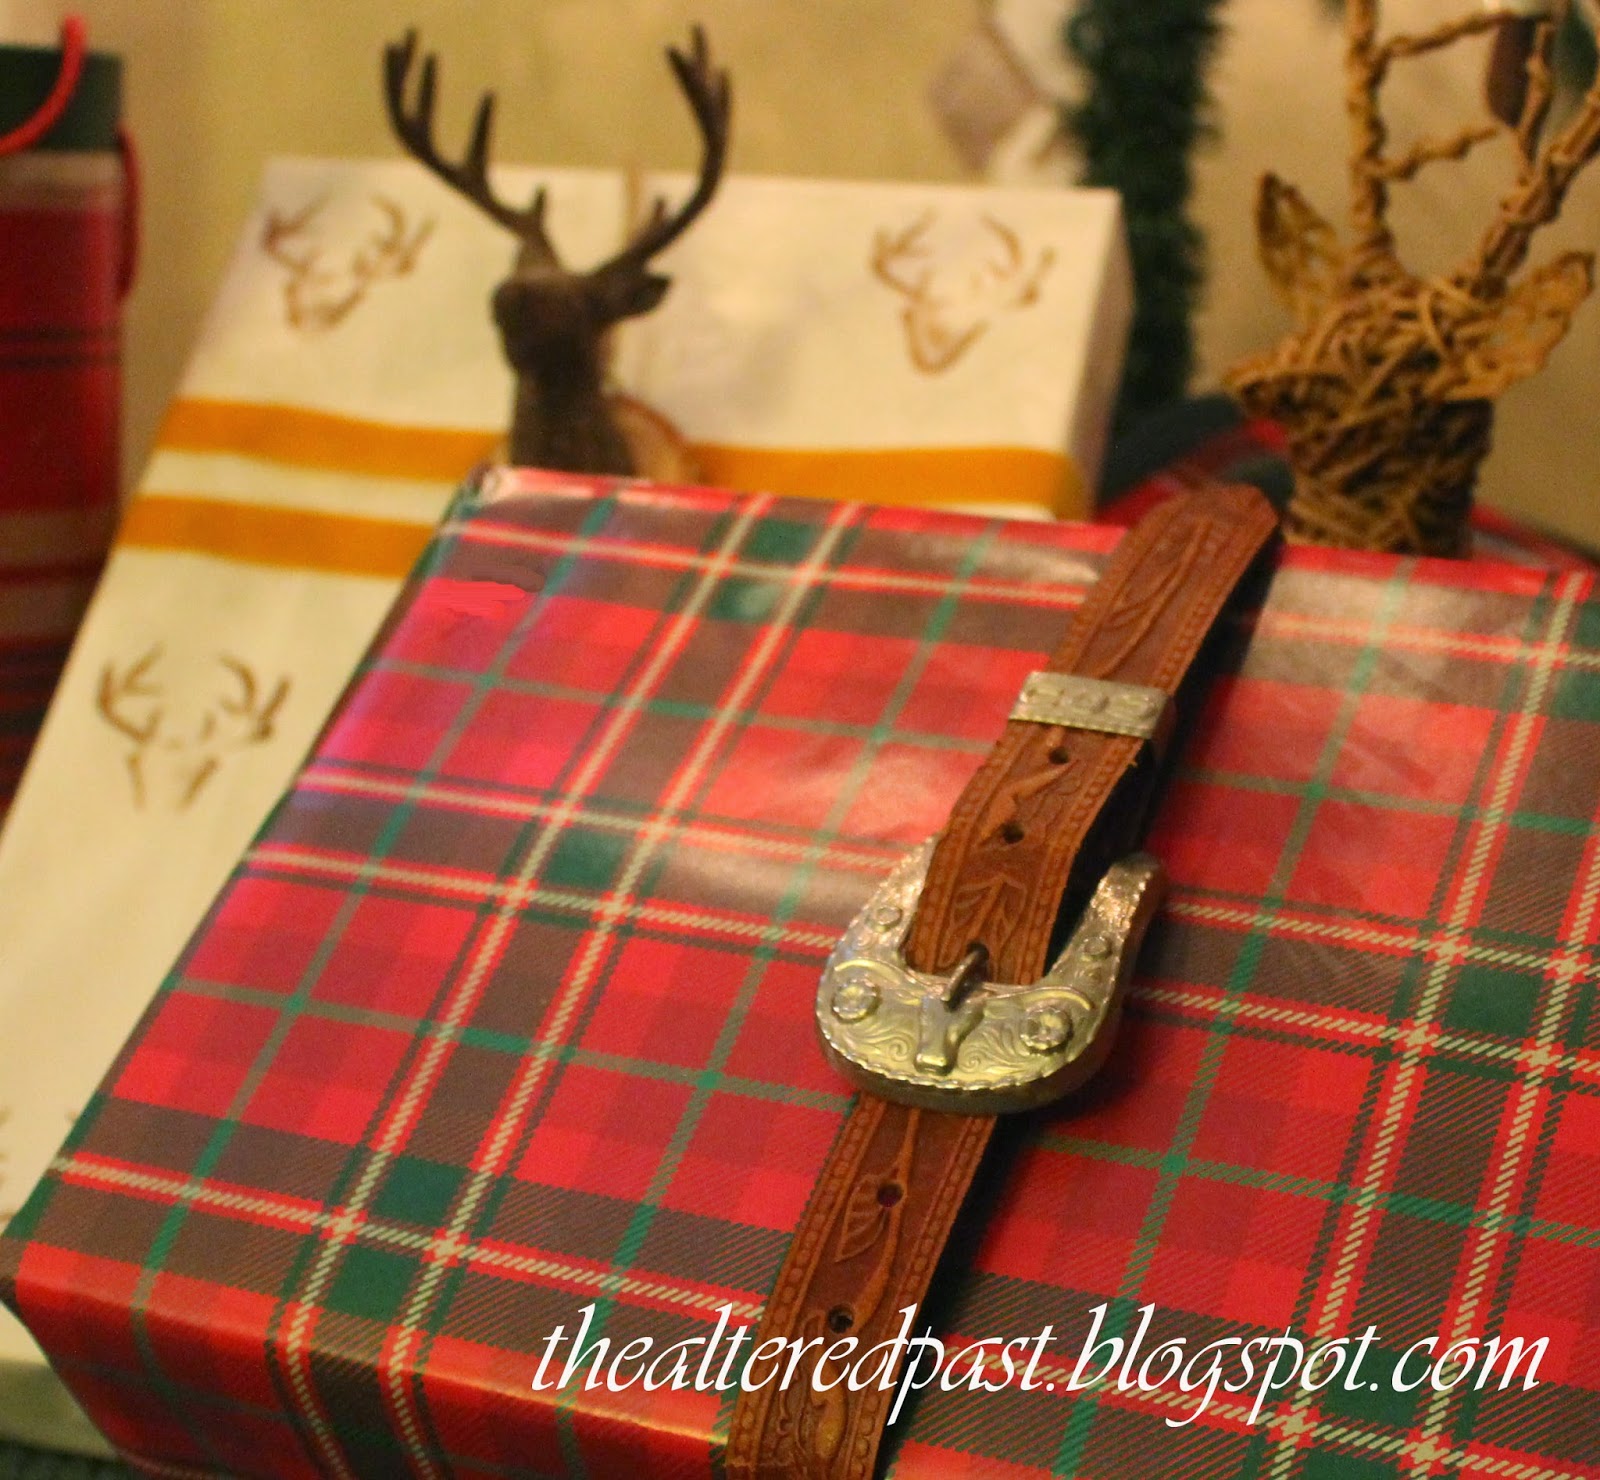 hunt themed gift wrap, the altered past blog